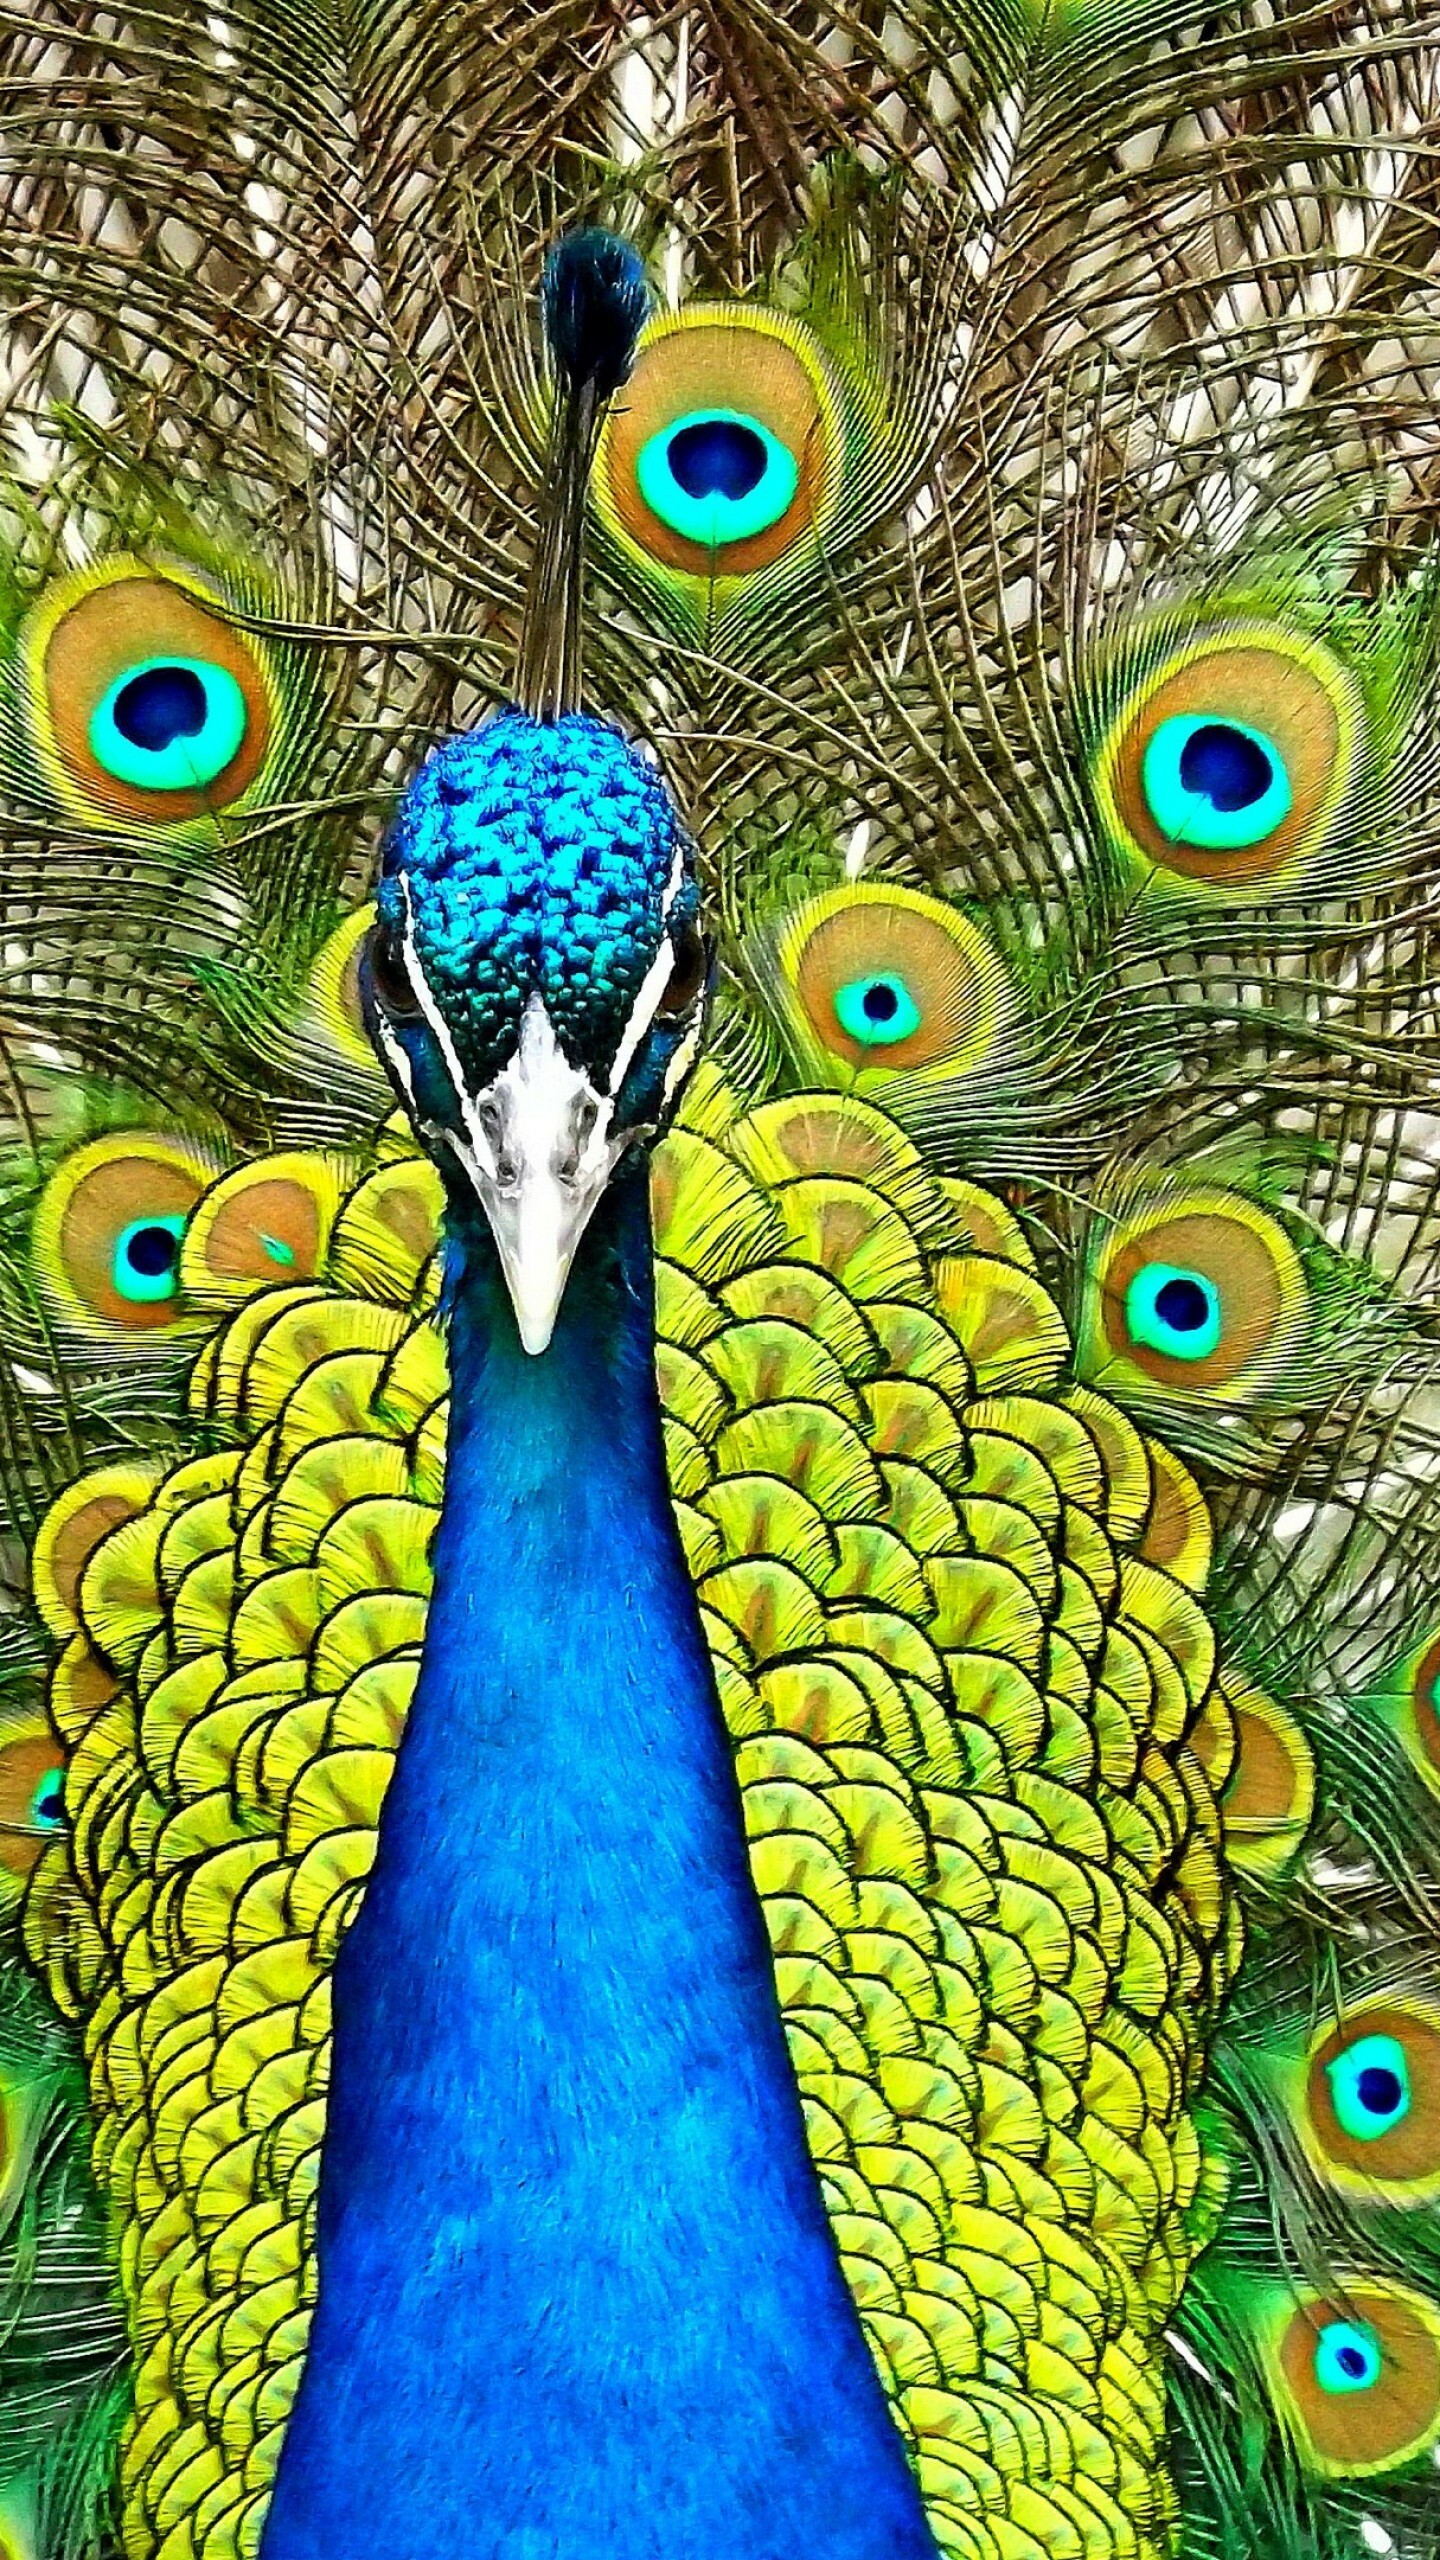 Peacock: The Peafowl train consists not of tail quill feathers, but highly elongated upper tail coverts. 1440x2560 HD Wallpaper.